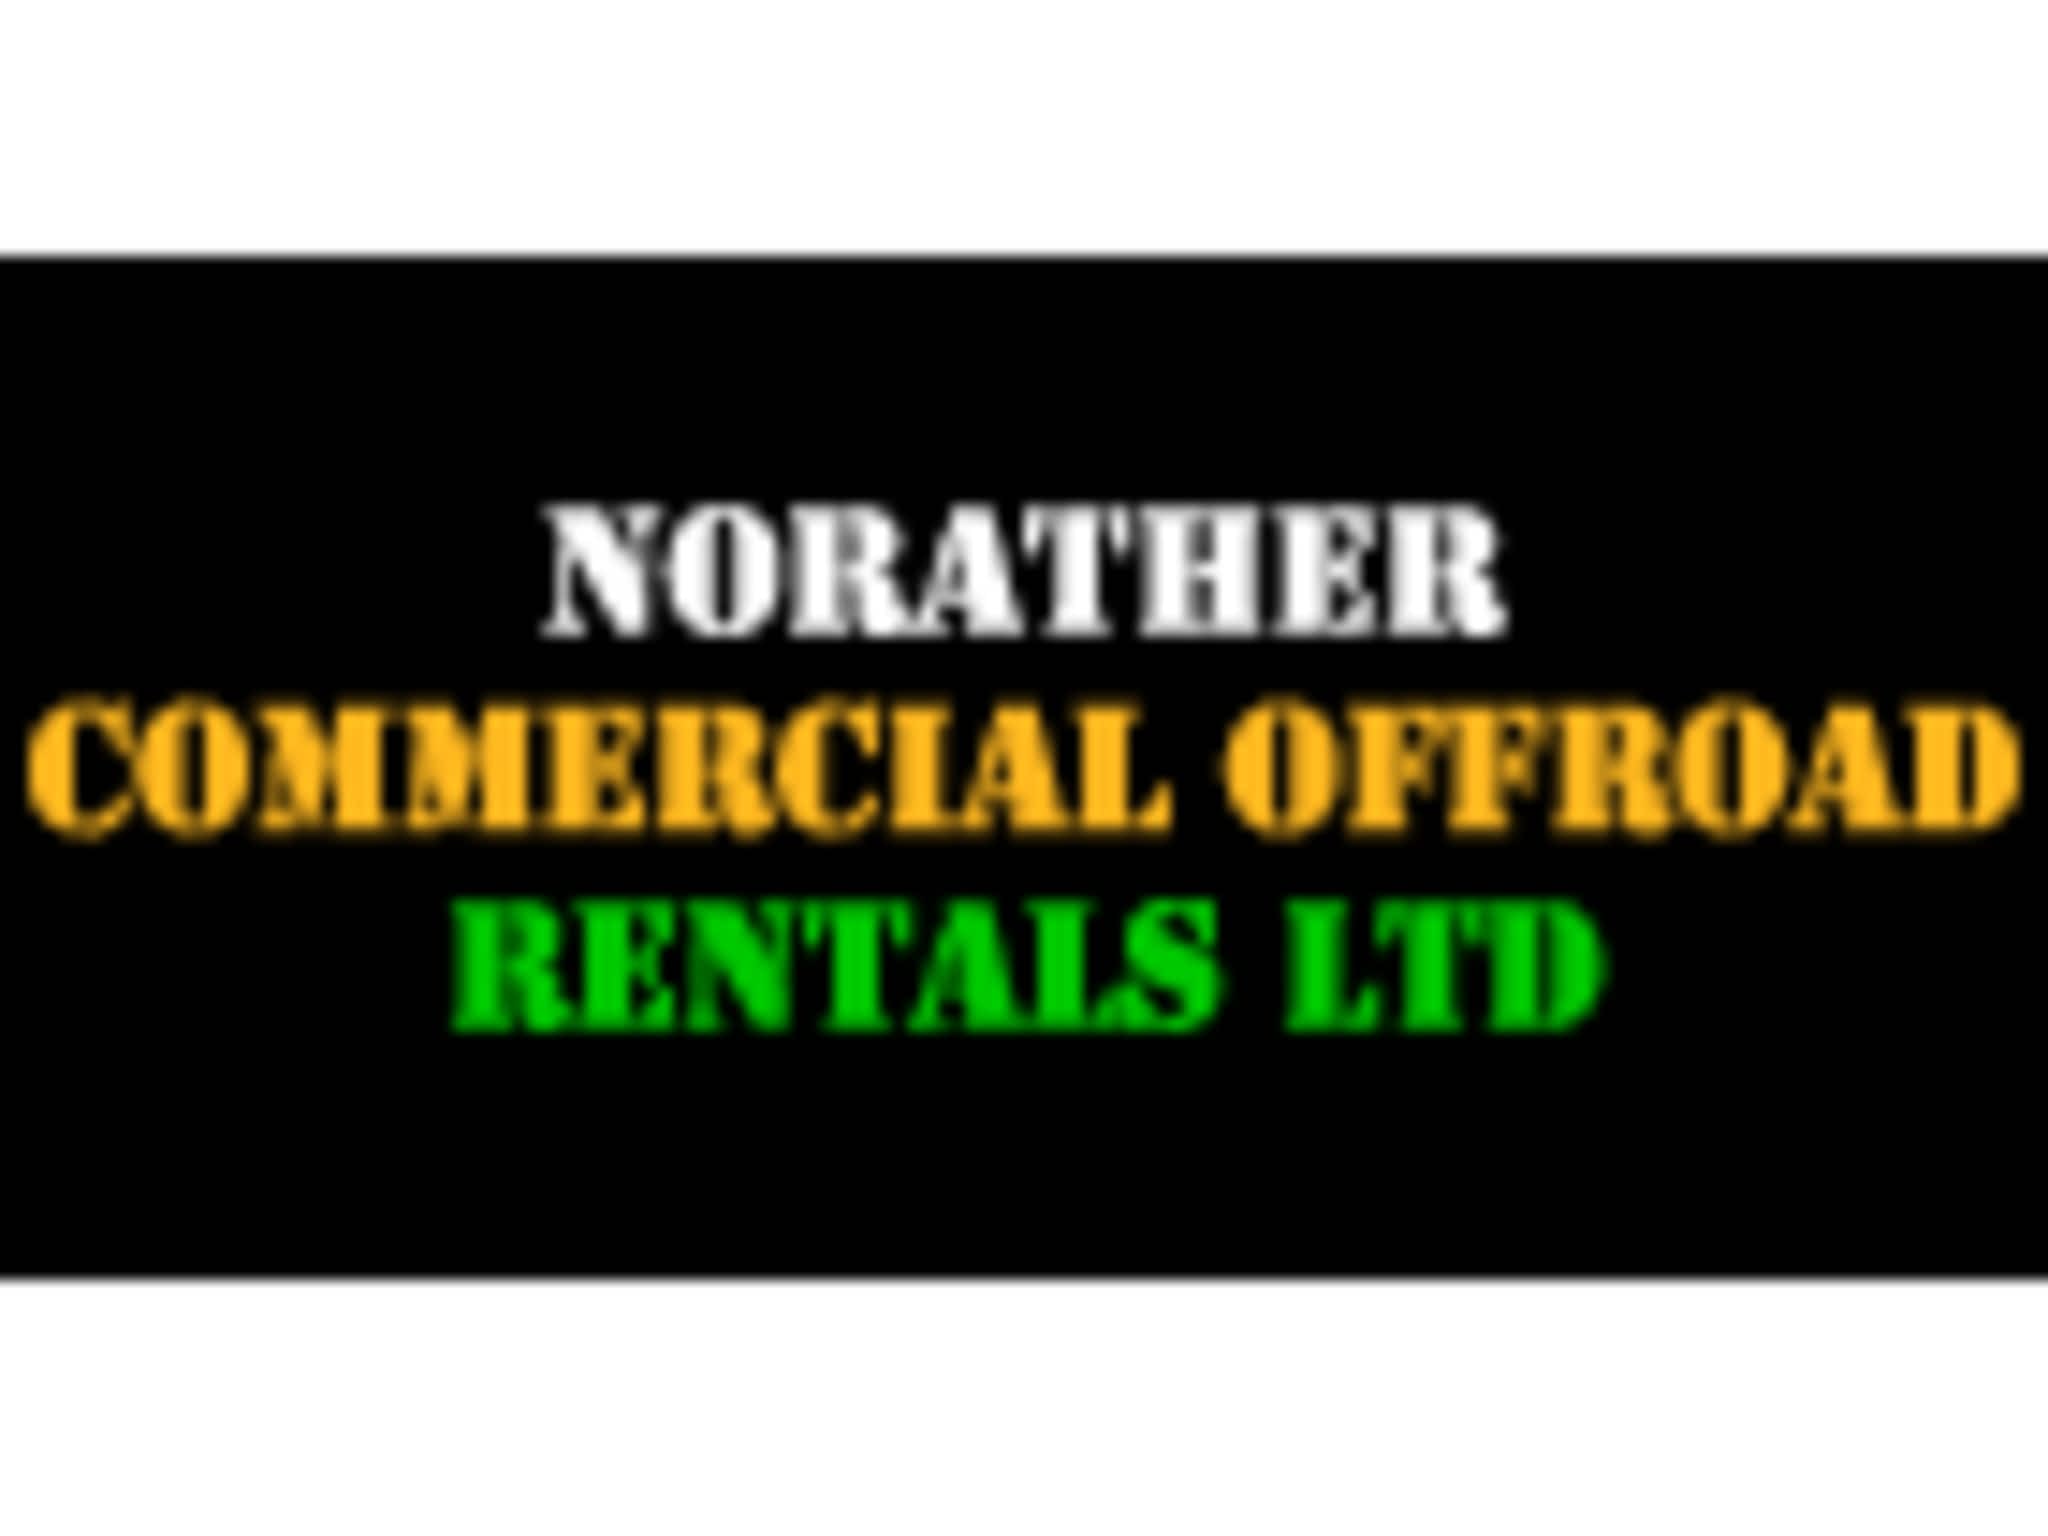 photo Northern Commercial Offroad Rentals